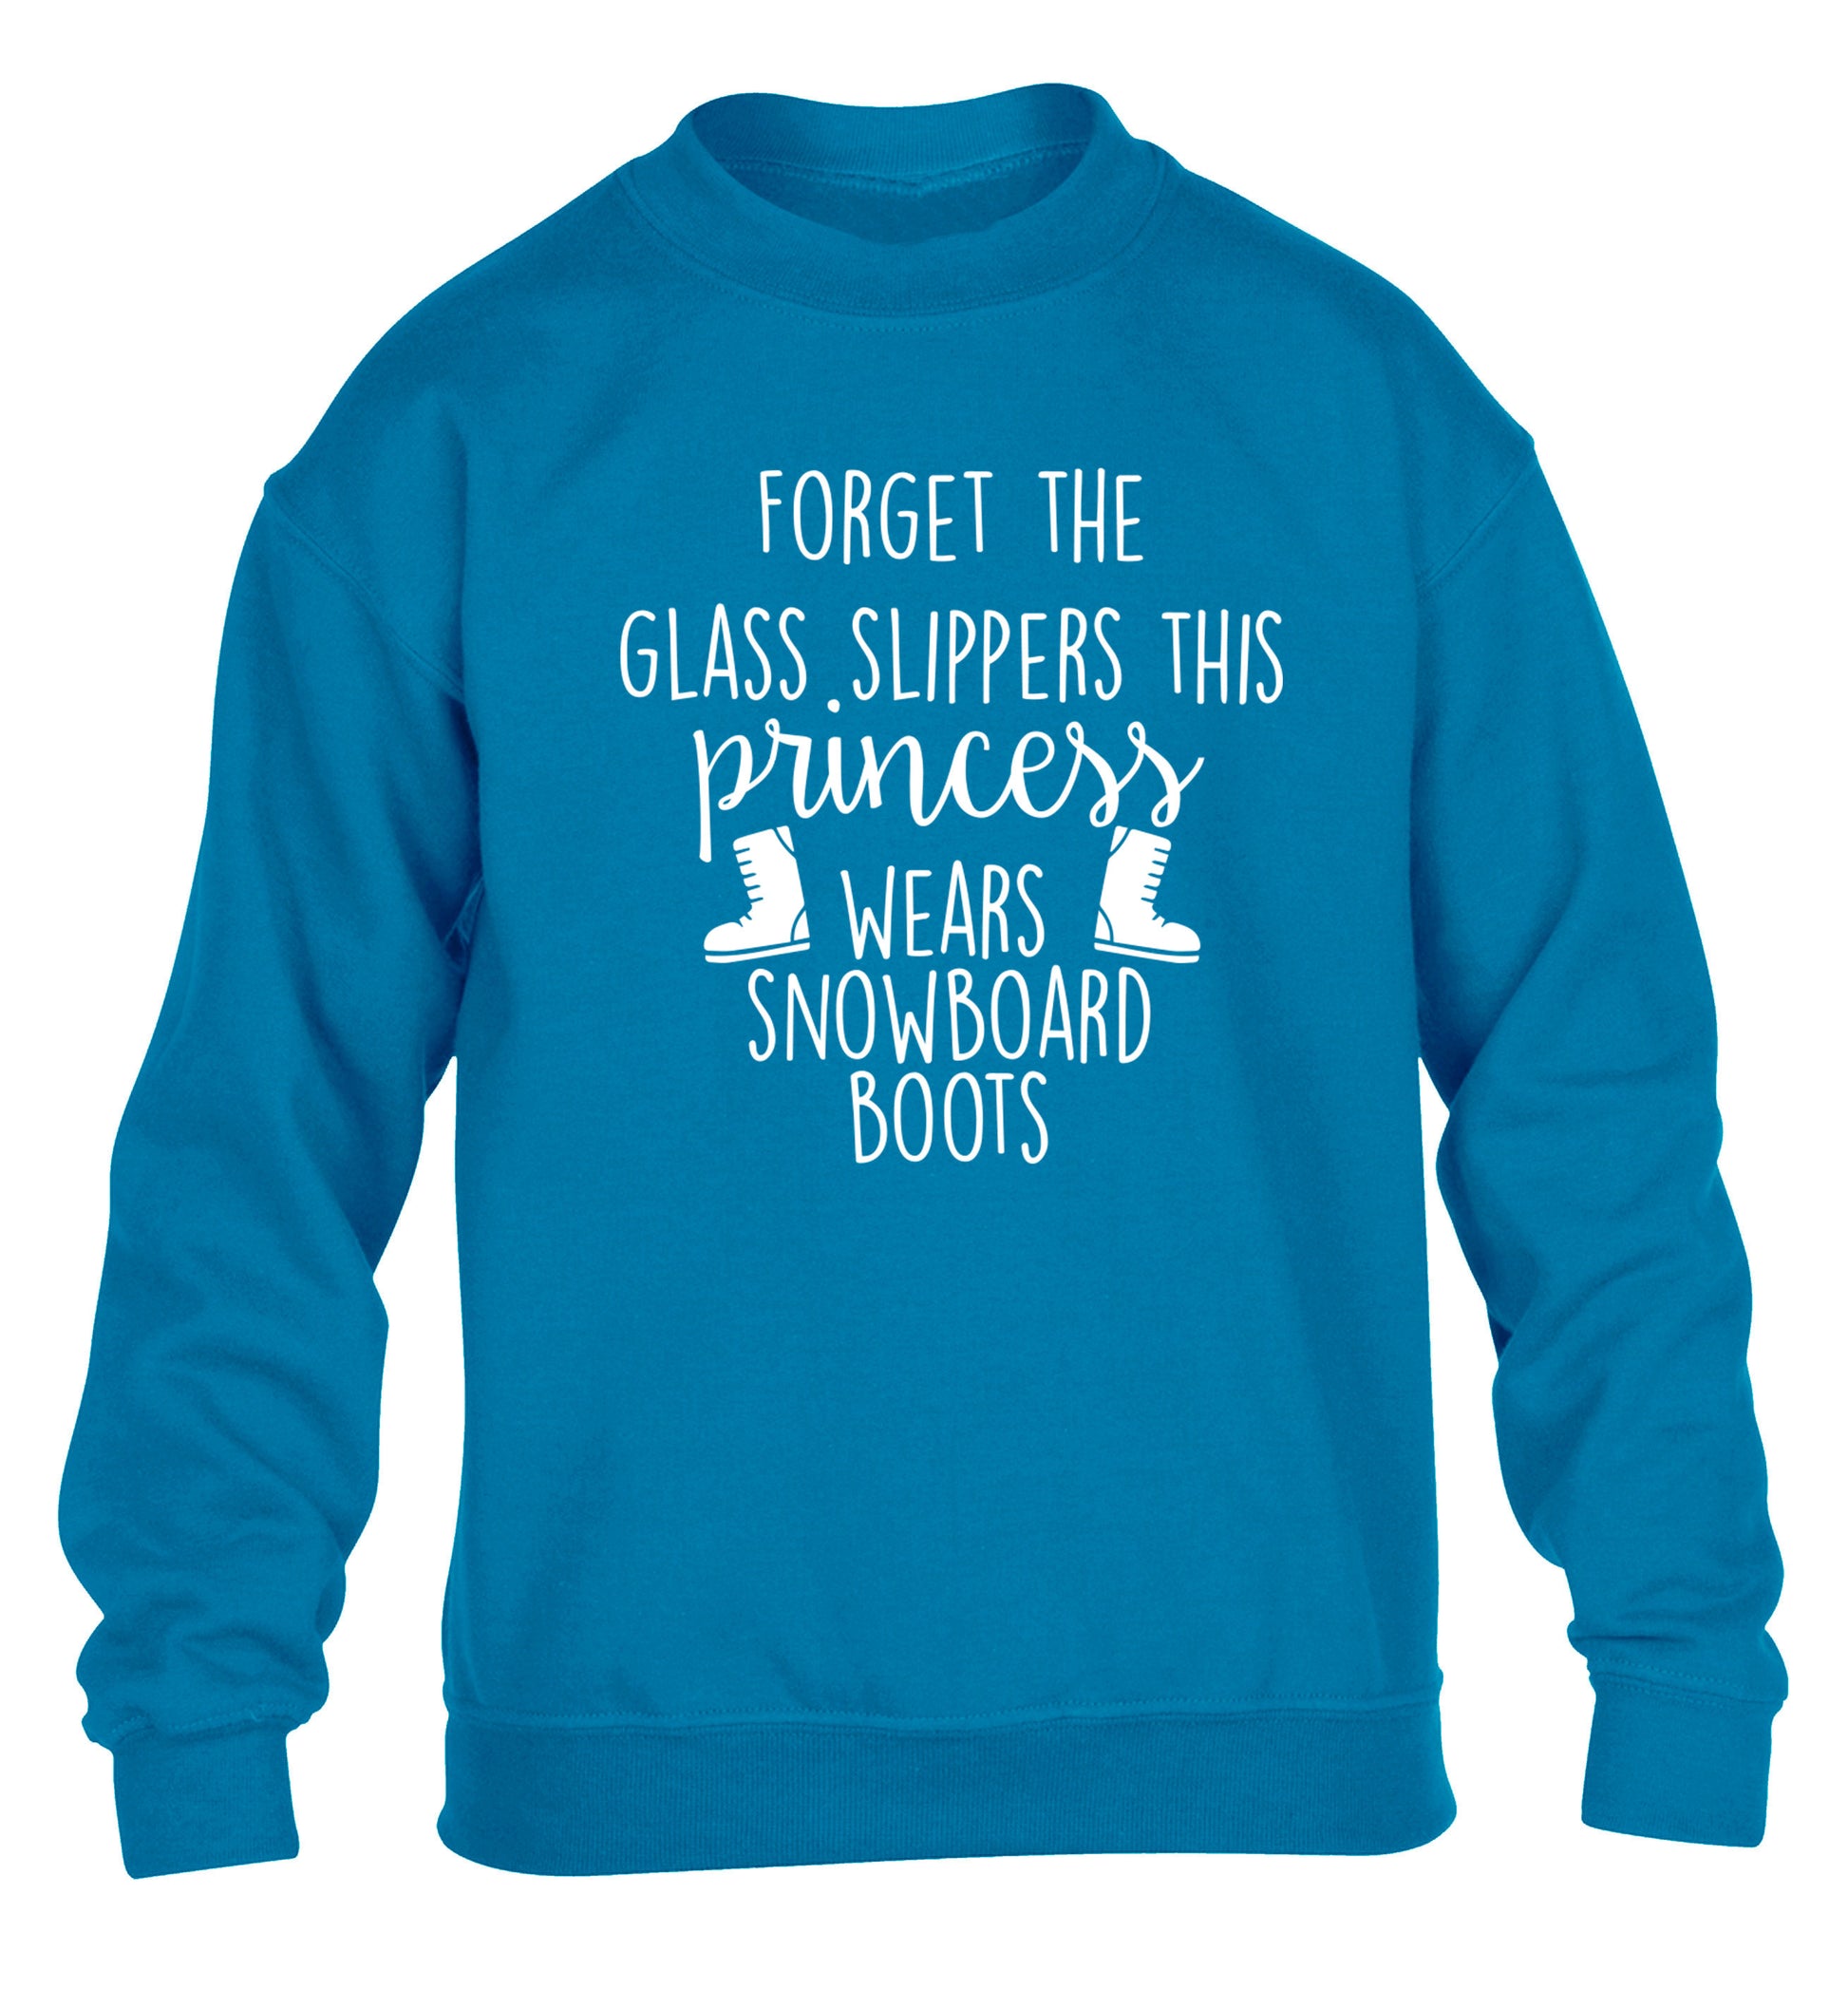 Forget the glass slippers this princess wears snowboard boots children's blue sweater 12-14 Years